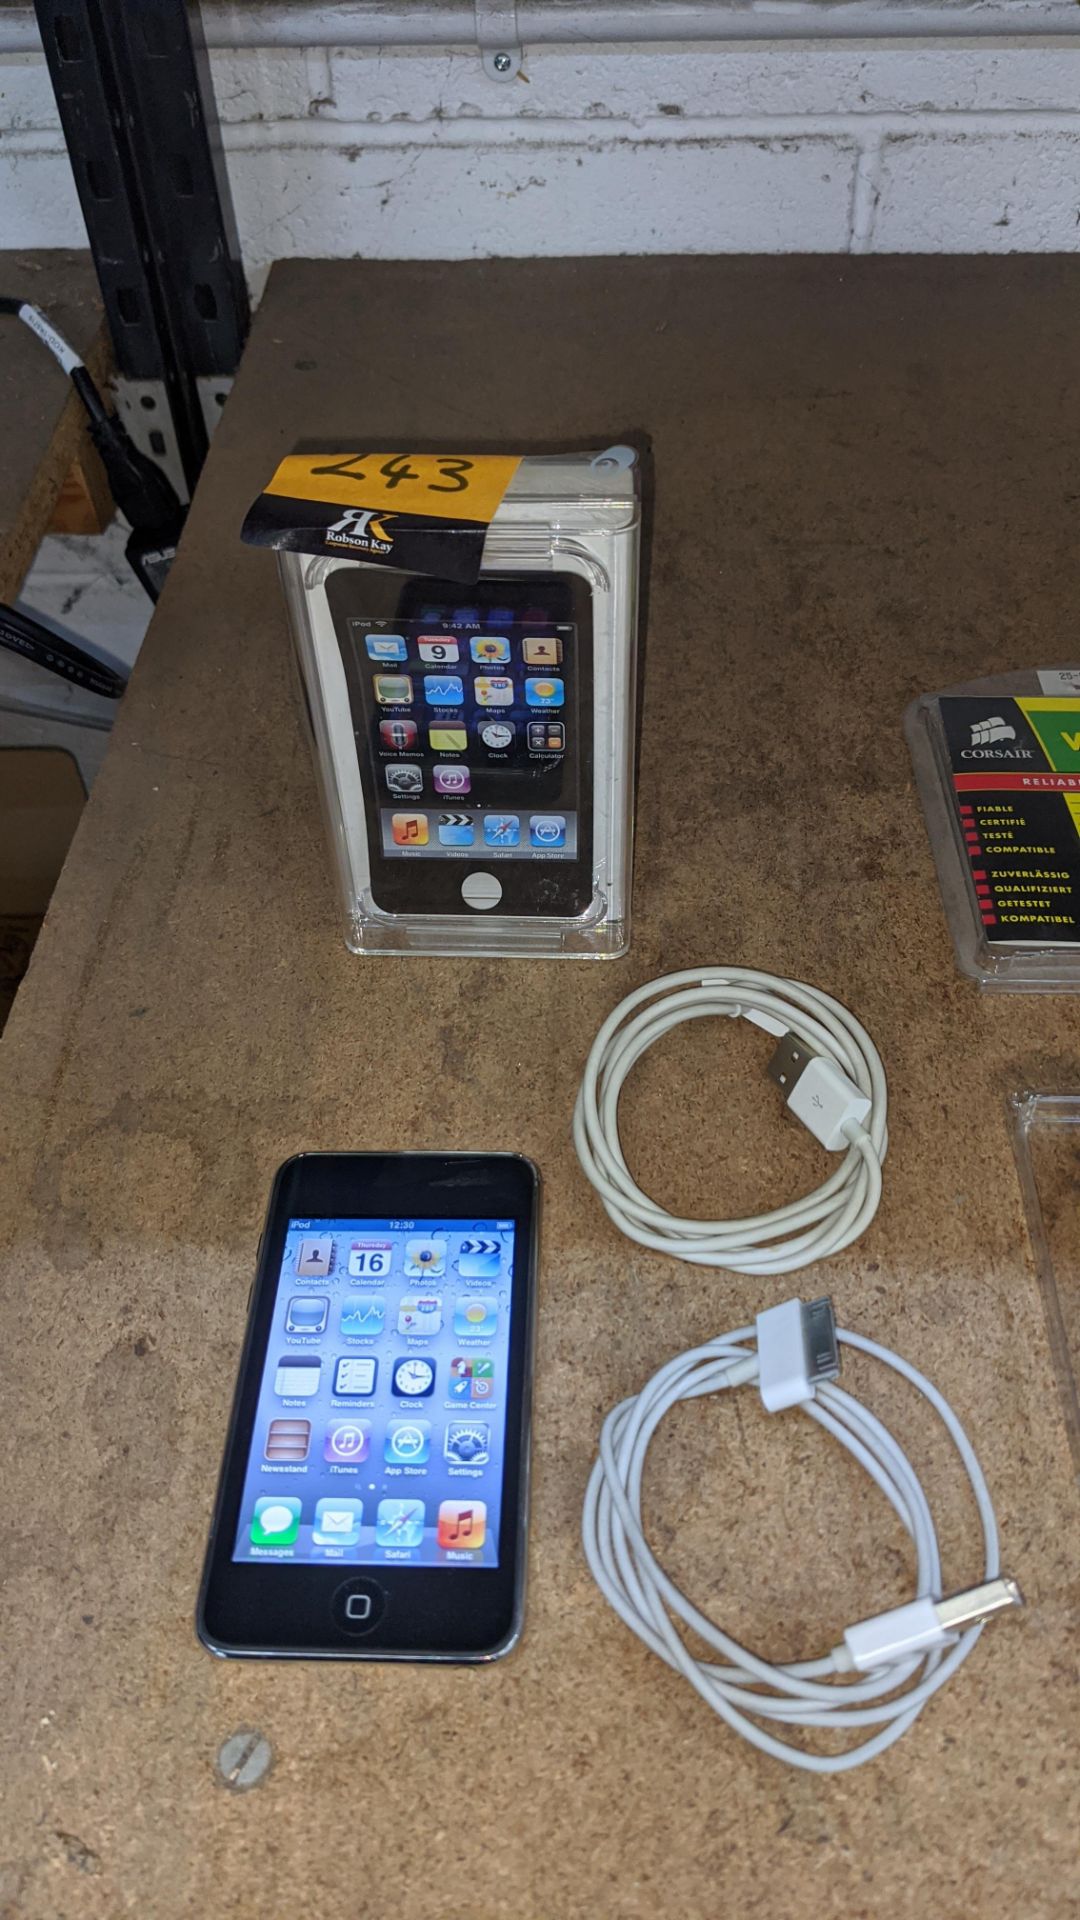 Apple iPod Touch Second Generation 32GB model A1318/EMC2310. Includes 2 off Apple cables plus box